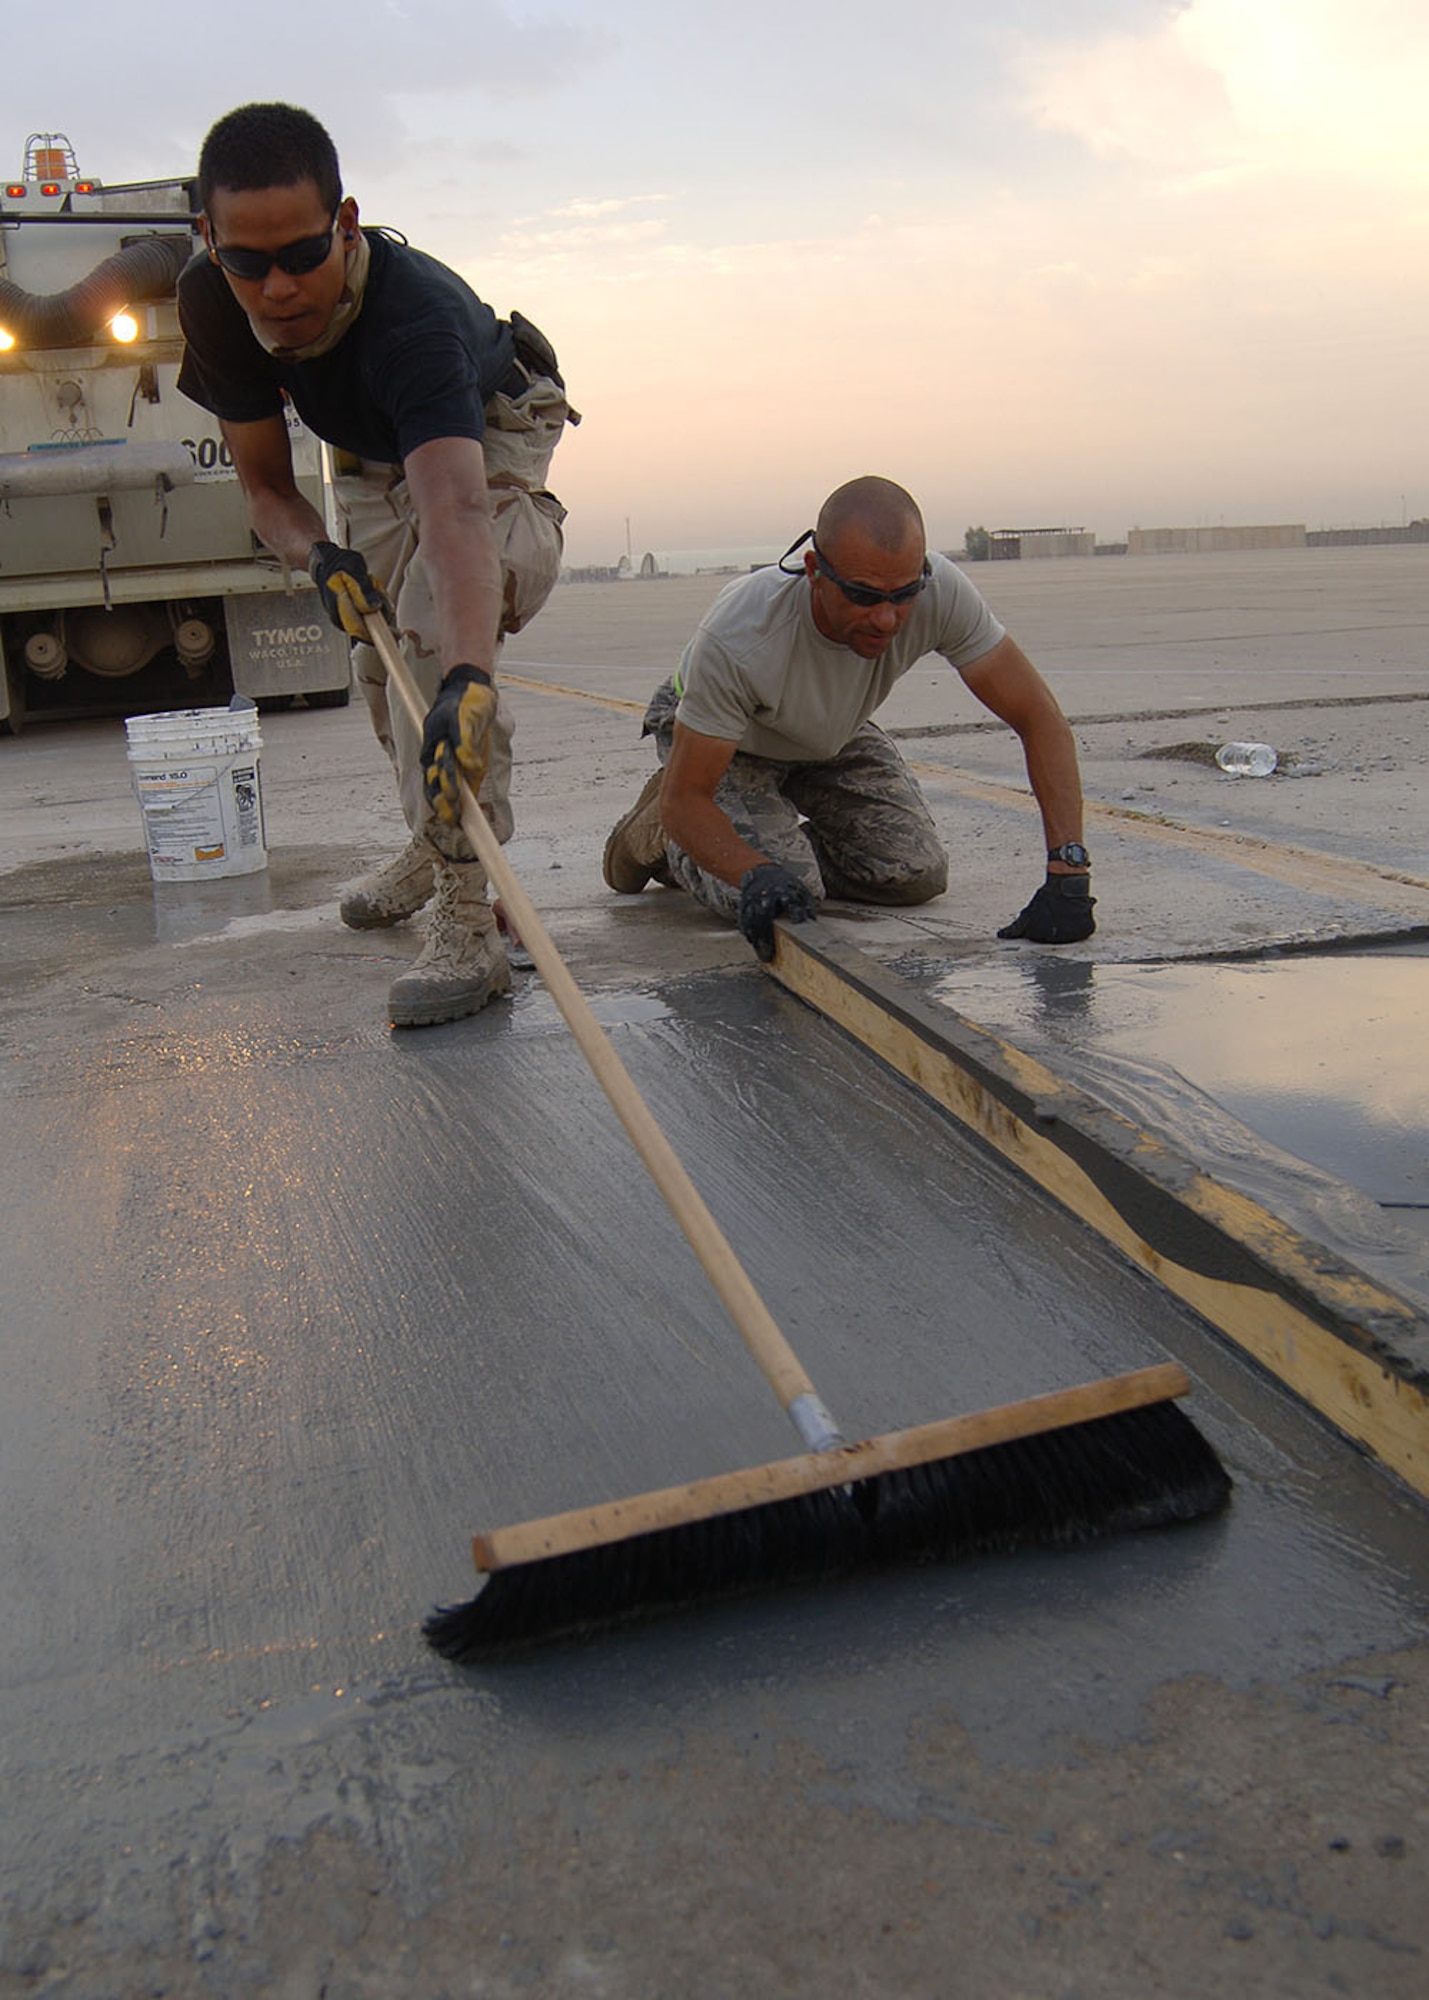 SATHER AIR BASE, Iraq -- Senior Airman Wilson Quinante brushes over newly poured concrete to even out the surface and give it a rough finish for anti-skid purposes, as Tech. Sgt. Jeff Jones uses a 2-by-4-inch board as a scree to push forward and smooth the mixture in the ramp area for repair. The 447th Expeditionary Civil Engineer Squadron Heavy Equipment Operations “Dirt Boys” repair damaged surface areas on the airfield here each Saturday morning. The team gets an early start, often working before sunrise, to beat the daytime high temperatures, which helps ensure a proper mixture cure time and a stronger slab. The team must also work quickly to limit the amount of time airfield operations are affected while repairs are done. Sather AB is the busiest airfield in Iraq, averaging 4,000 transient aircraft activities each month. Airman Quinante is deployed from Eglin Air Force Base, Fla. (Staff Sgt. Jennifer Lindsey)